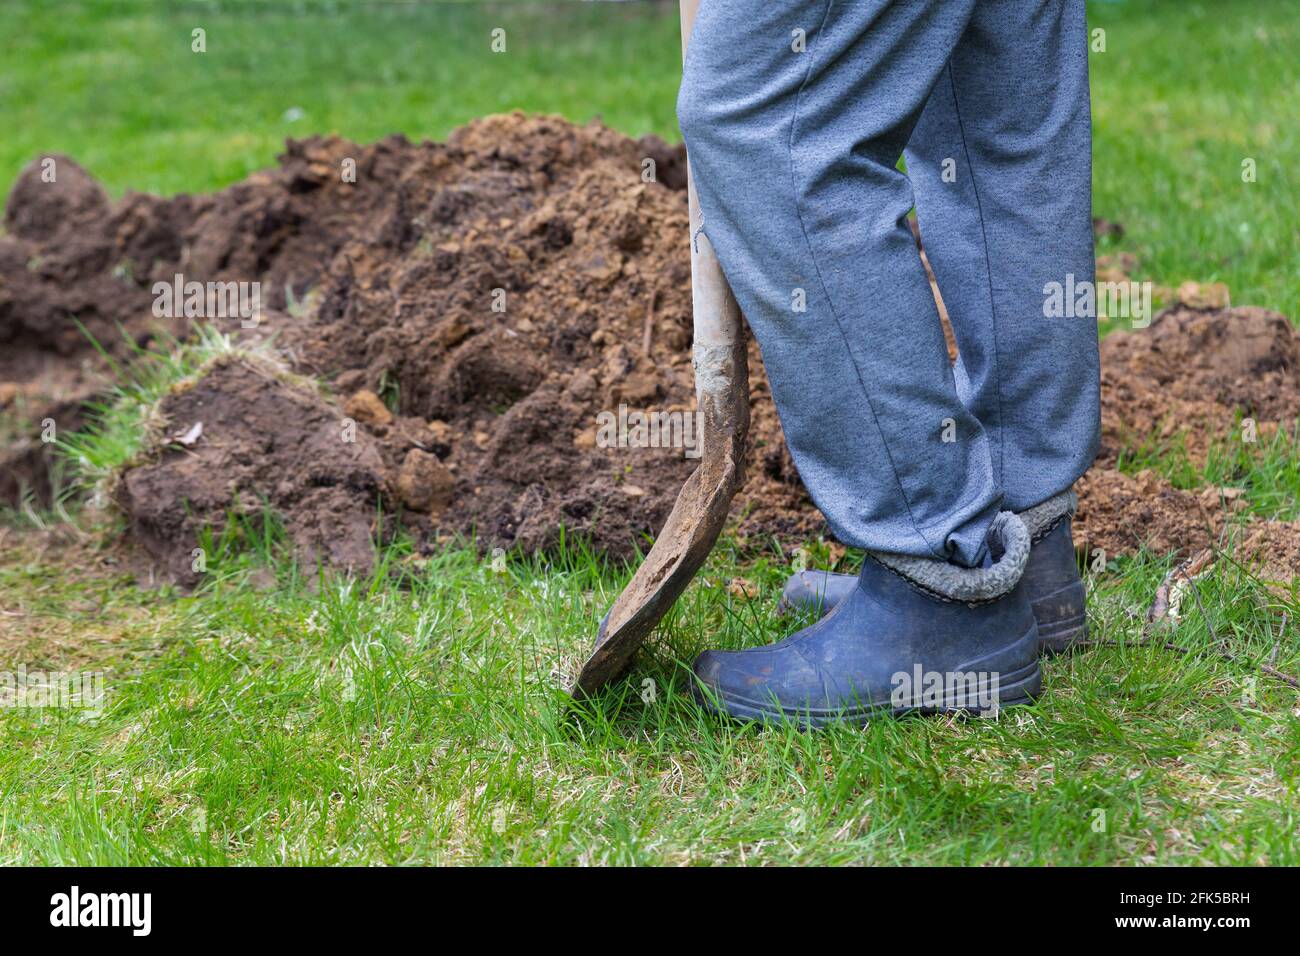 Legs of a man in rubber boots with a shovel near the excavated ground close-up. Stock Photo